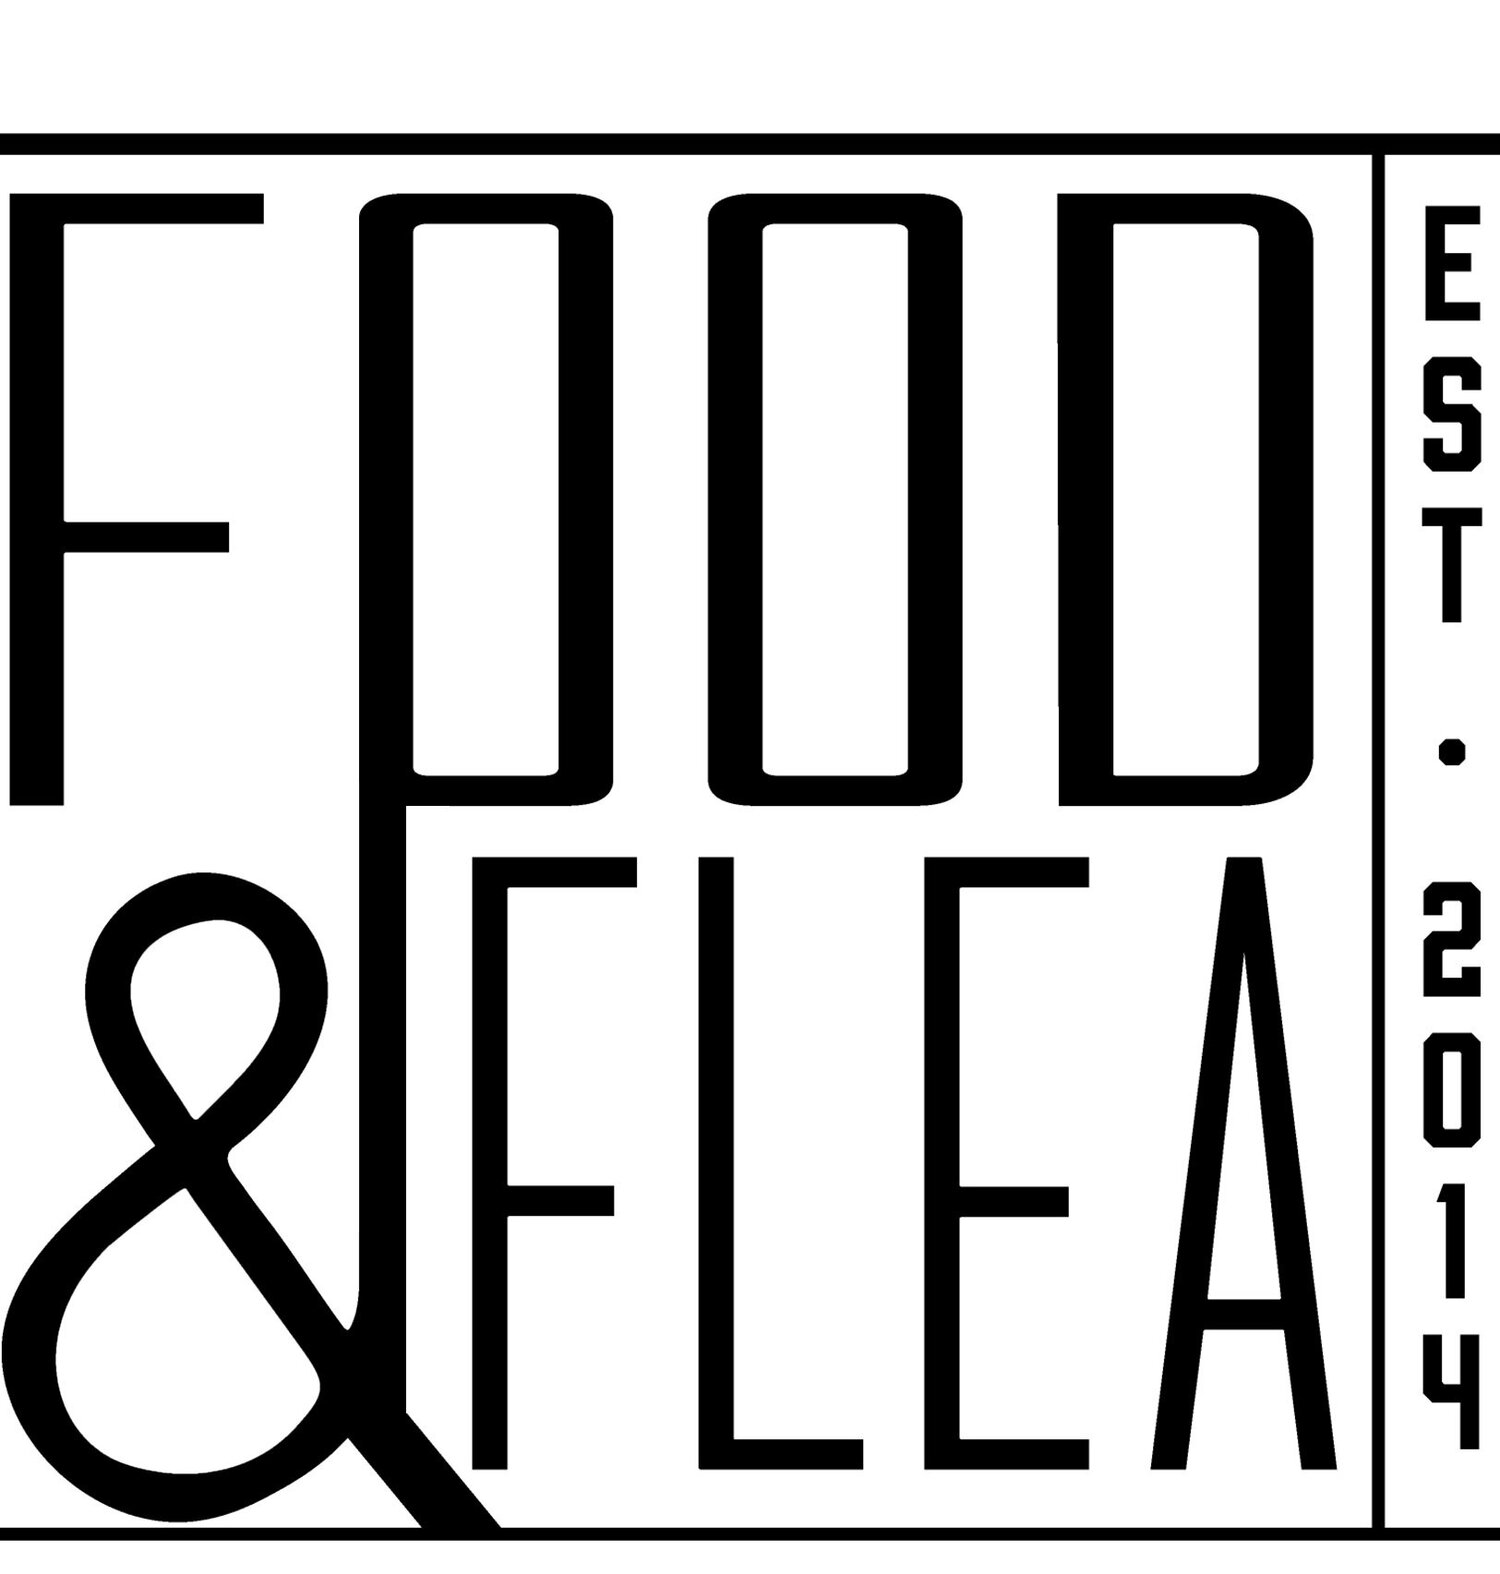 2019 Cary Spring Food and Flea Market